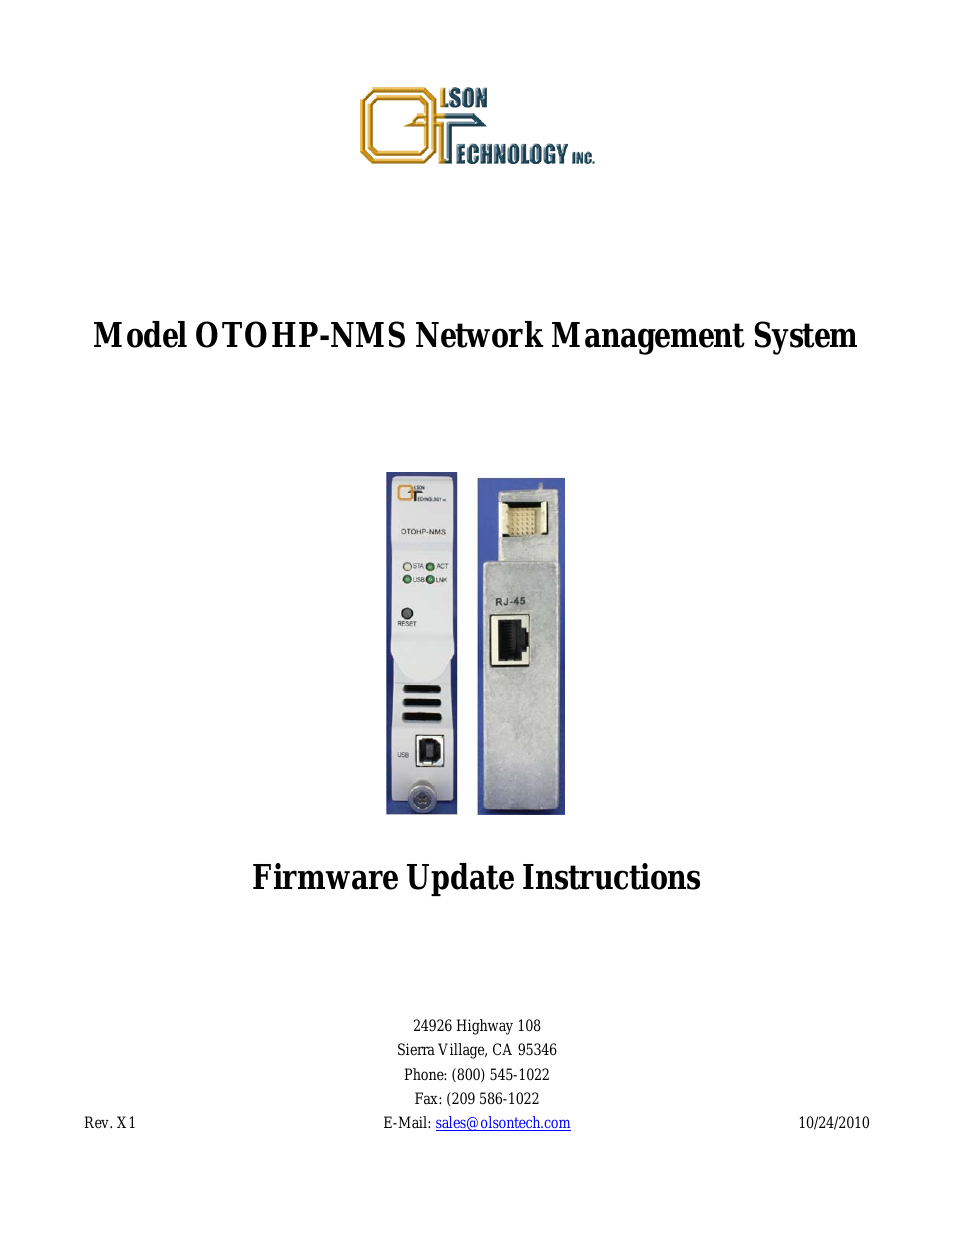 OTOHP-NMS Firmware Update Instructions